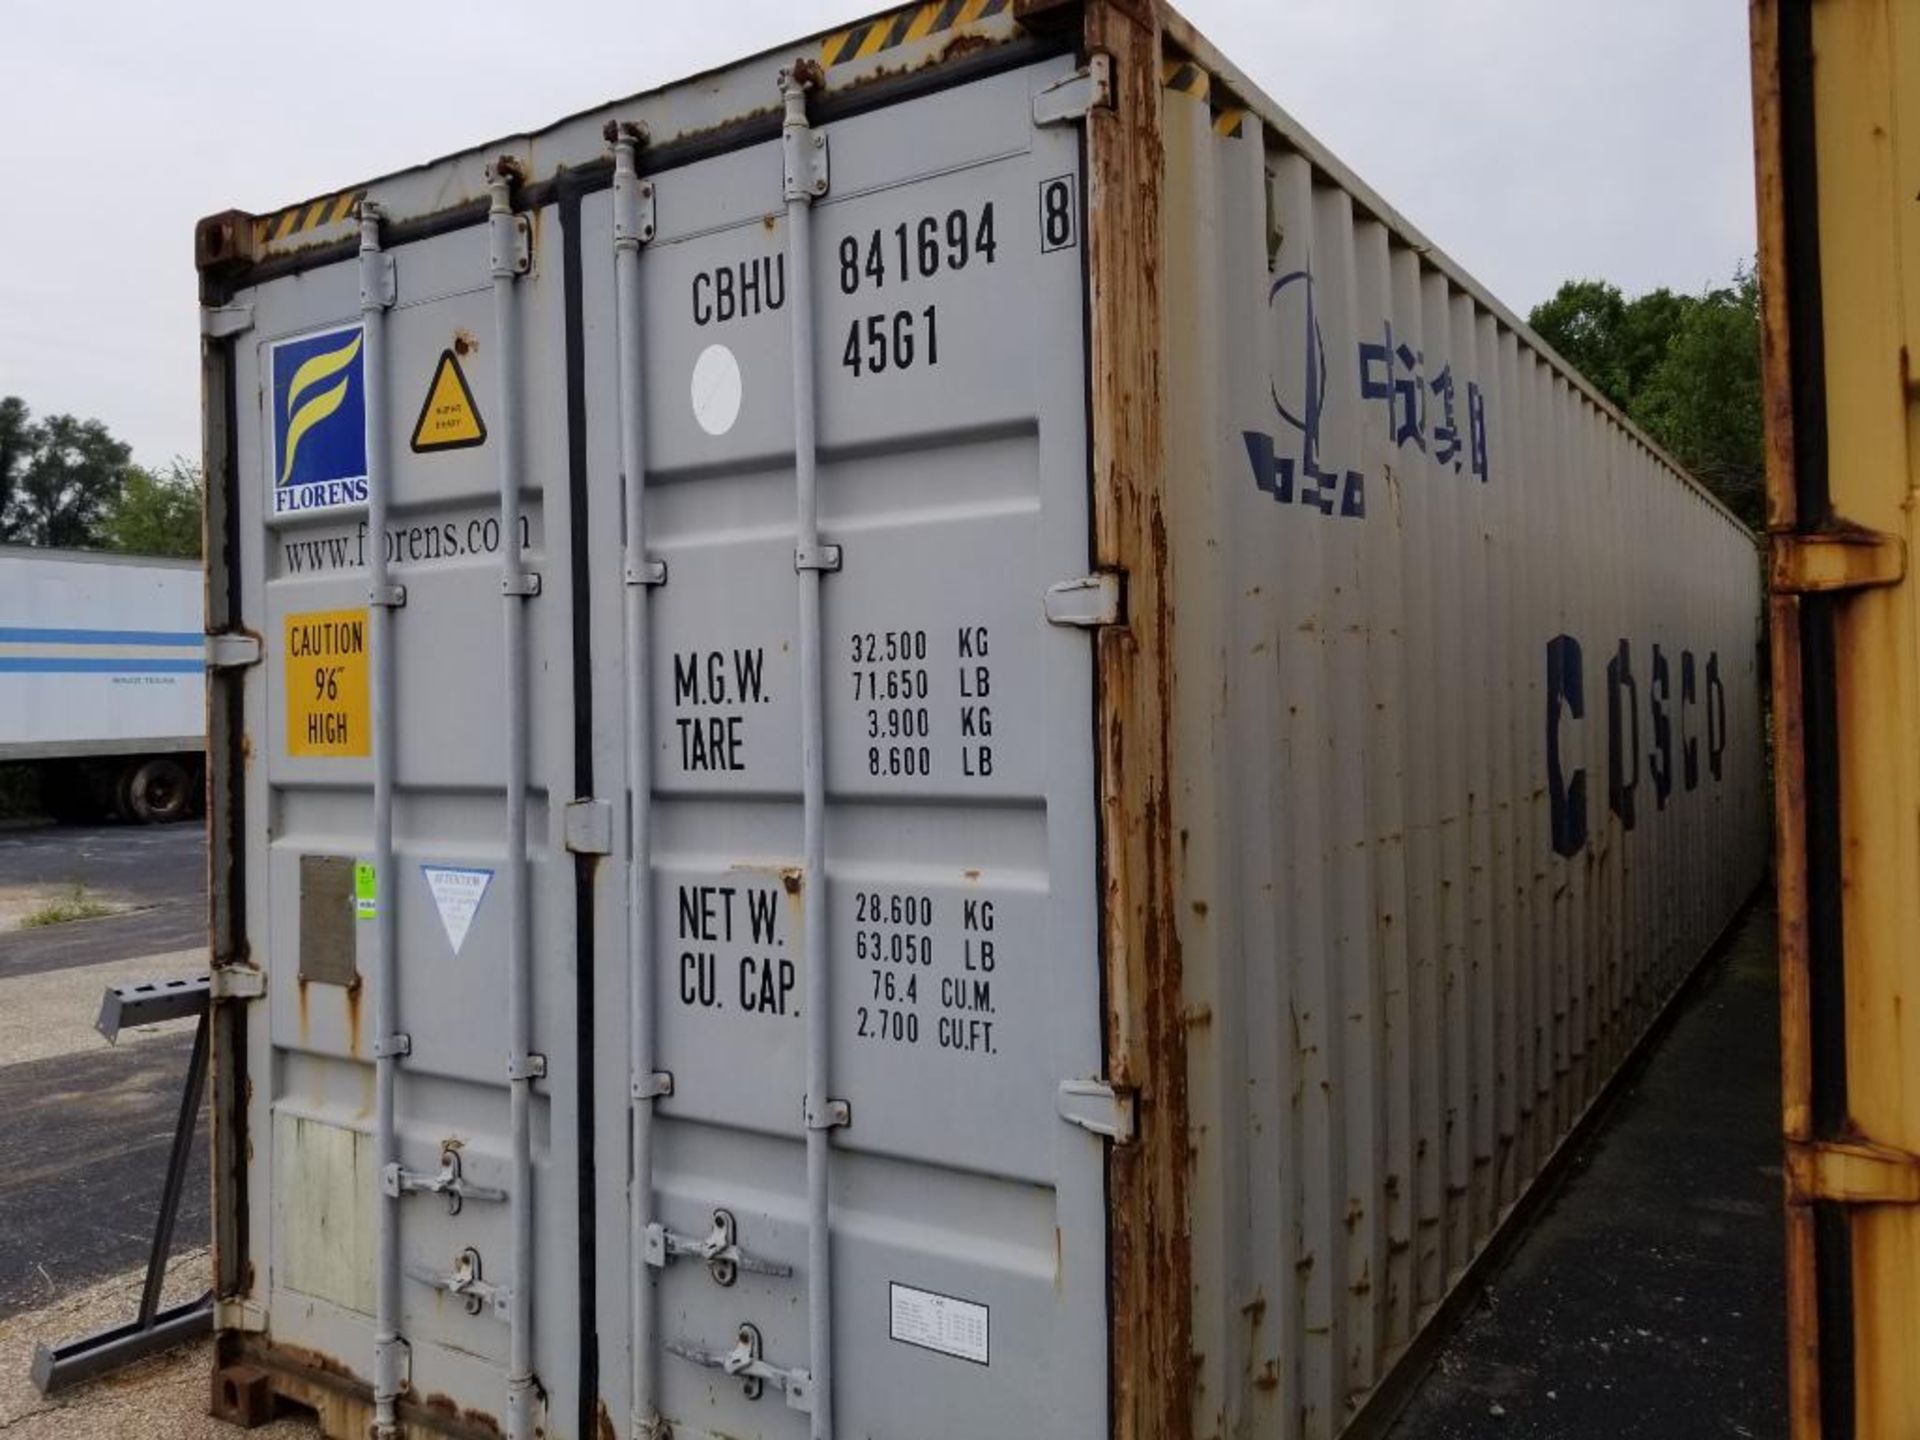 2006 Storage container. 40ft length. Type CX02-41FLR. ID# CBHU841694B. Max gross weight 71,650lbs. - Image 9 of 9